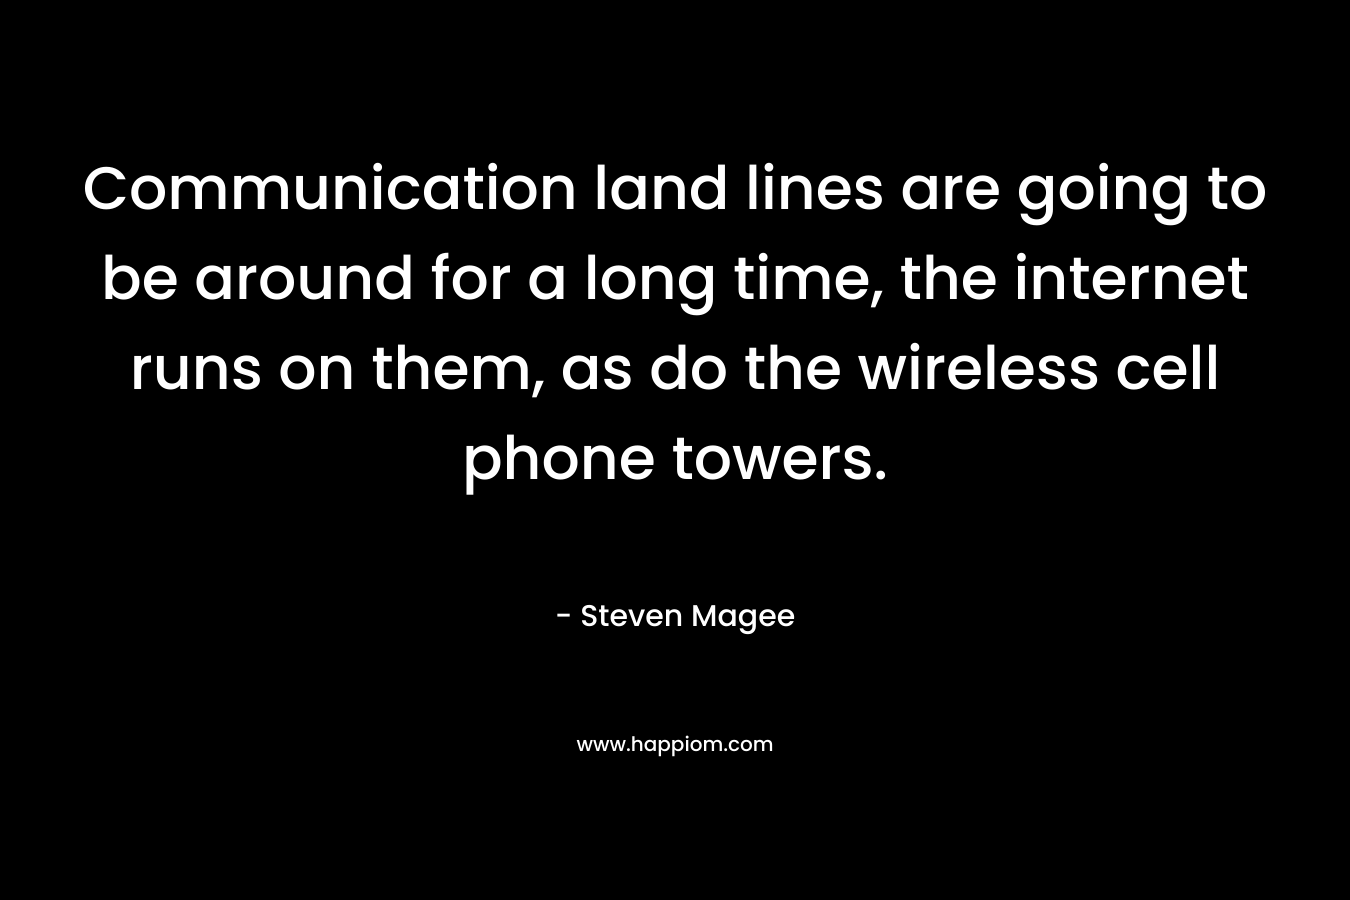 Communication land lines are going to be around for a long time, the internet runs on them, as do the wireless cell phone towers. – Steven Magee